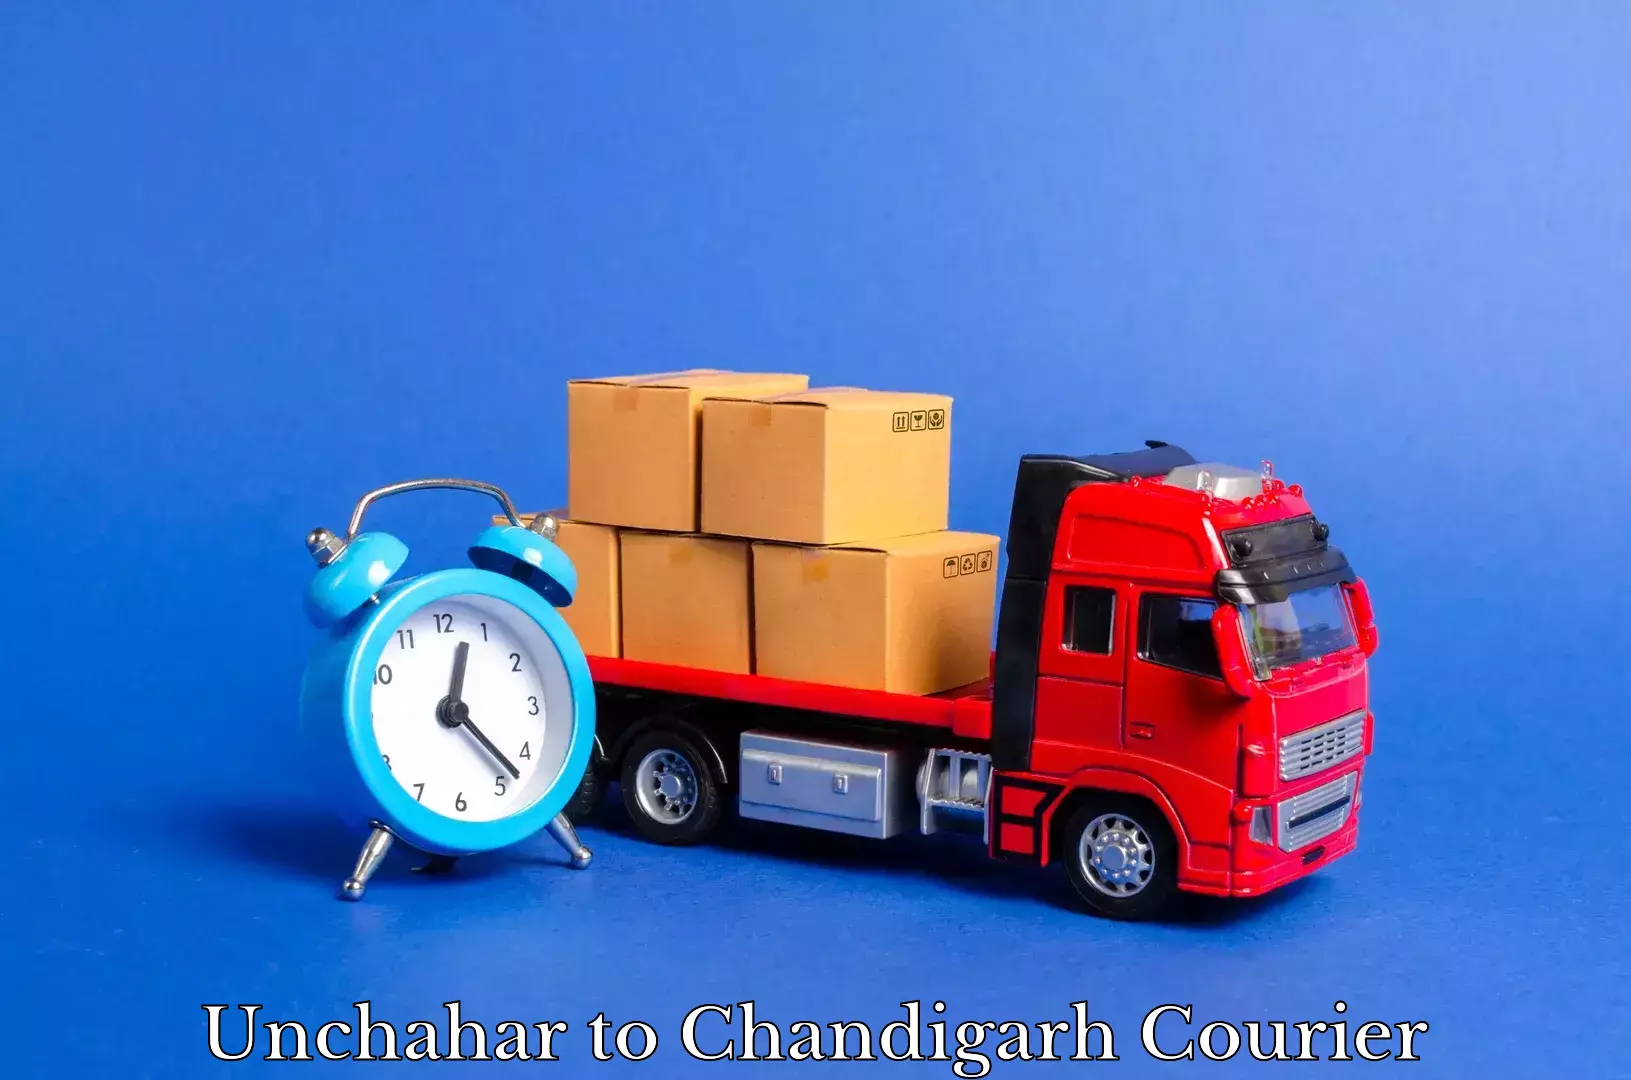 Furniture moving plans Unchahar to Chandigarh